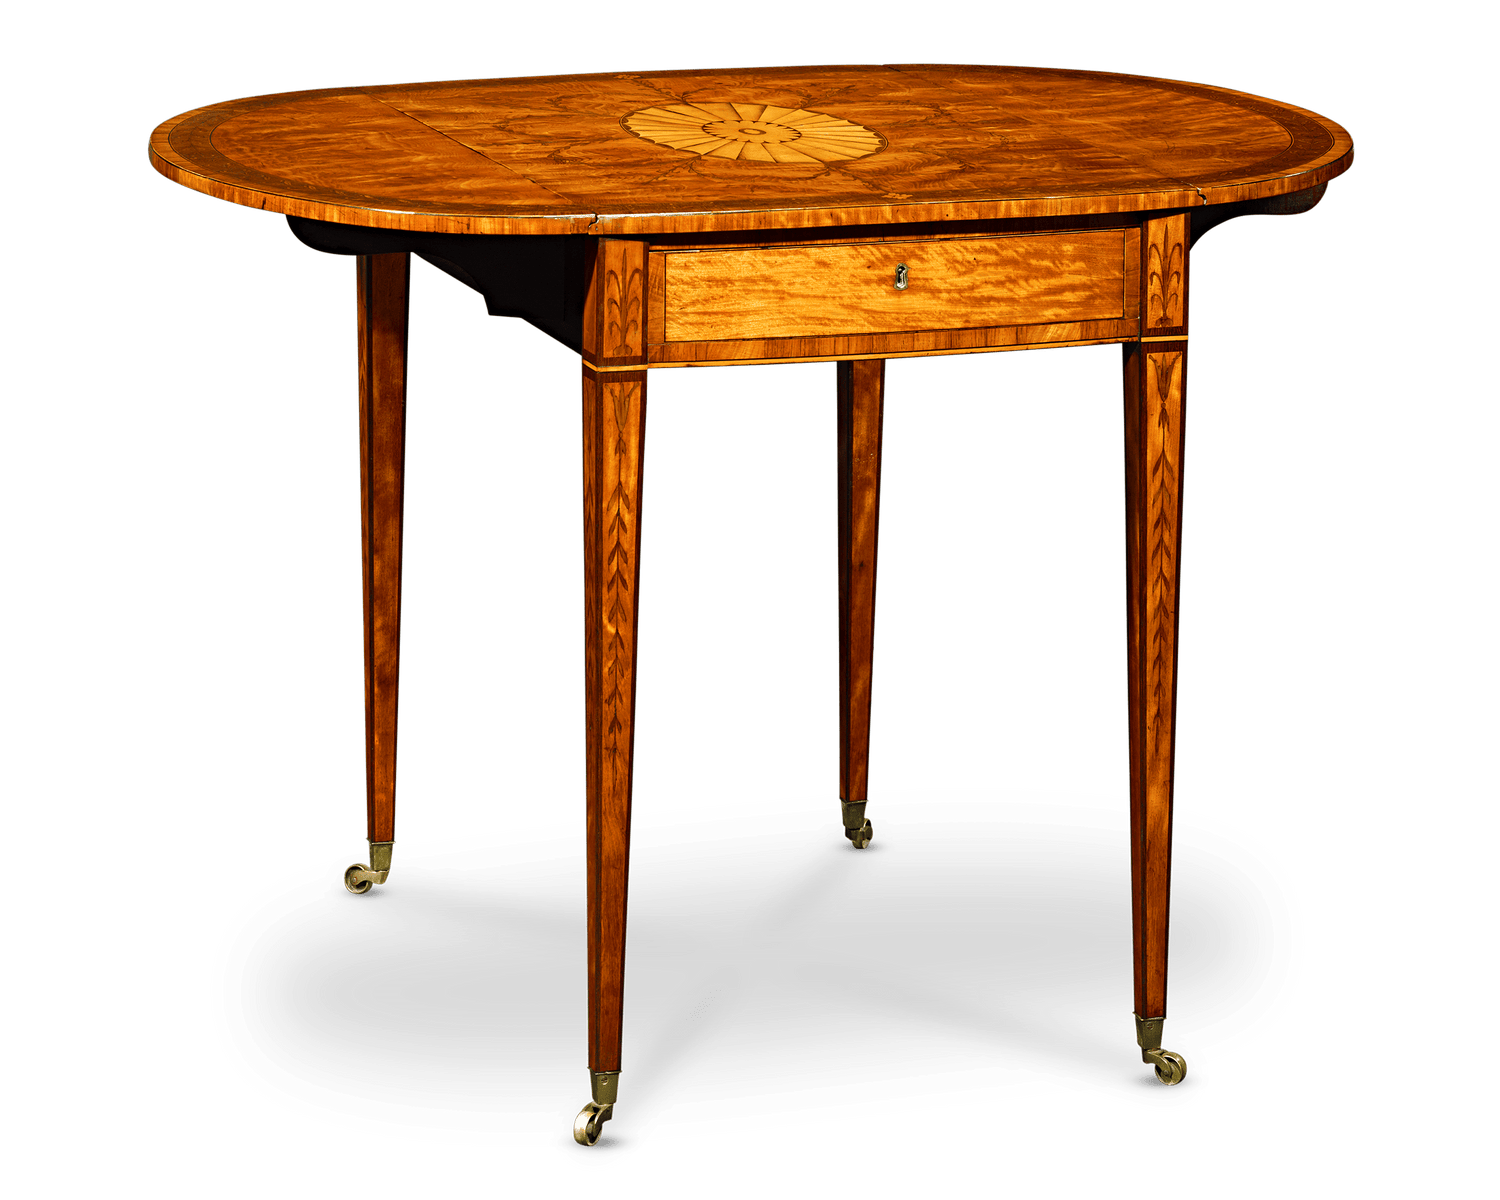 George III Pembroke Table attributed to Ince & Mayhew